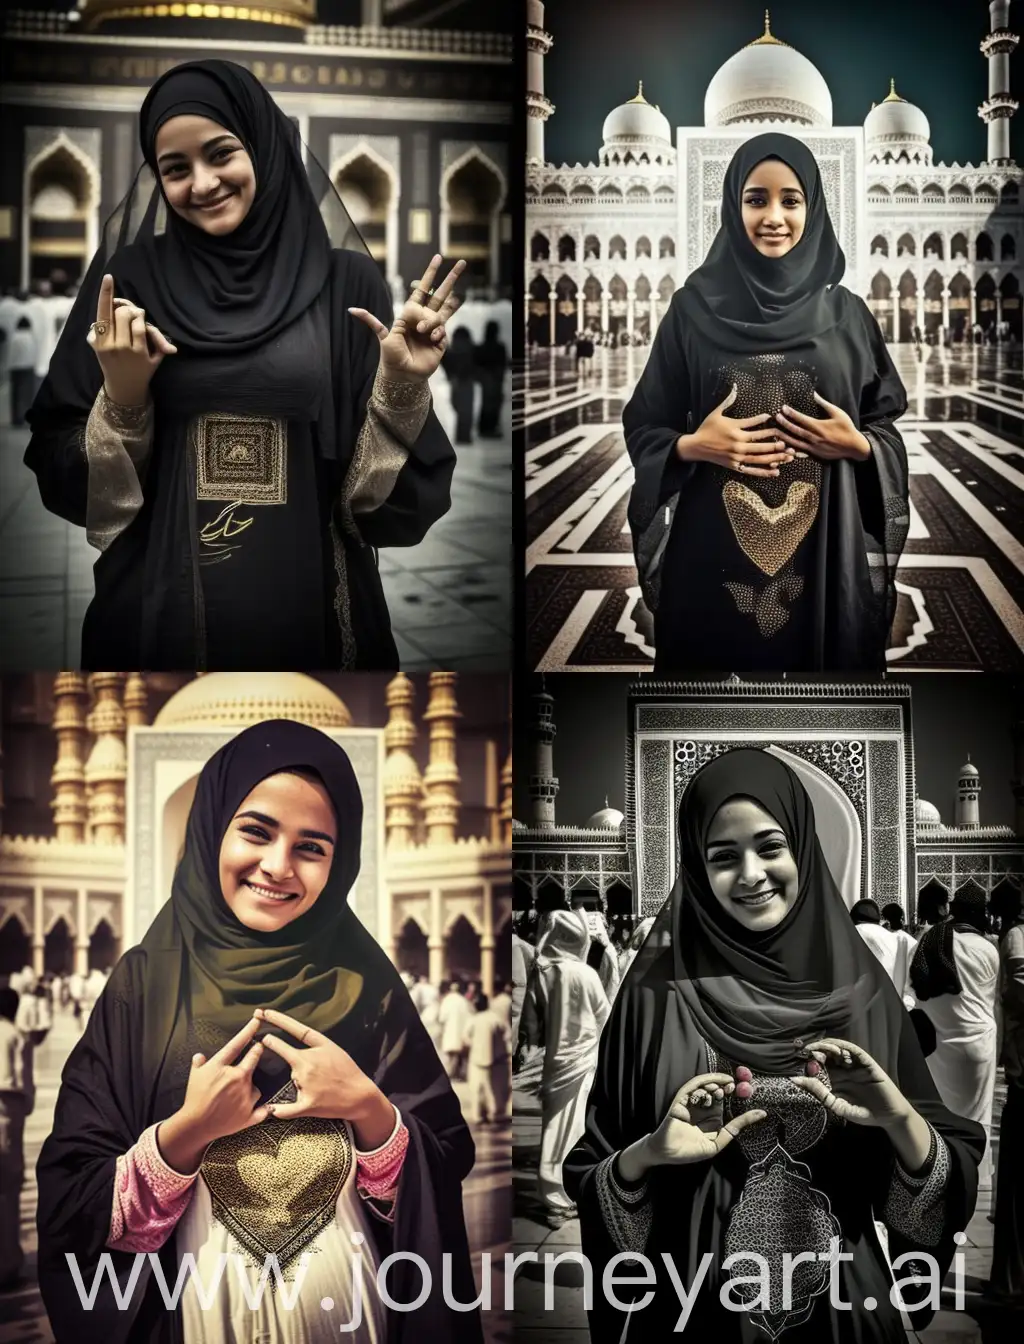 Muslim-Woman-Poses-with-Heart-Sign-Gesture-at-Kaaba